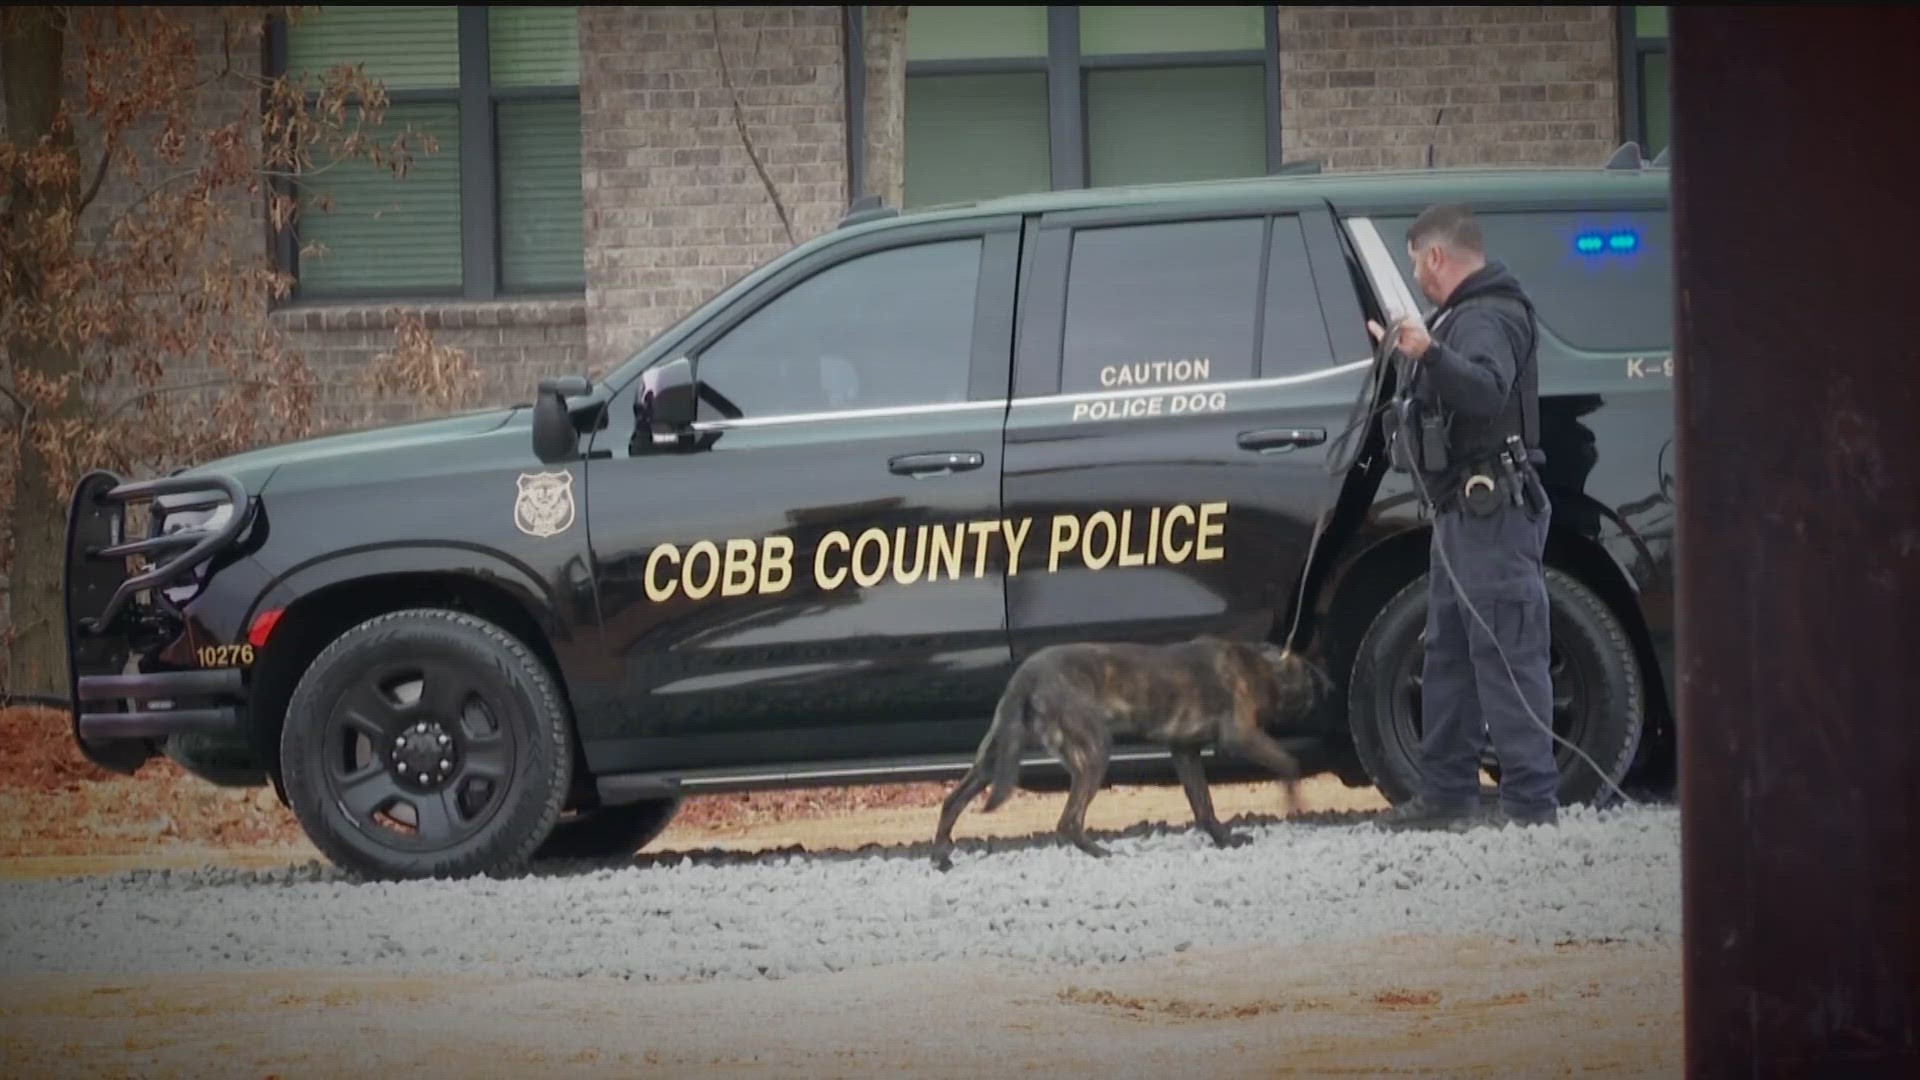 A person was shot and killed Wednesday at an apartment complex near a busy intersection in Cobb County, police said.